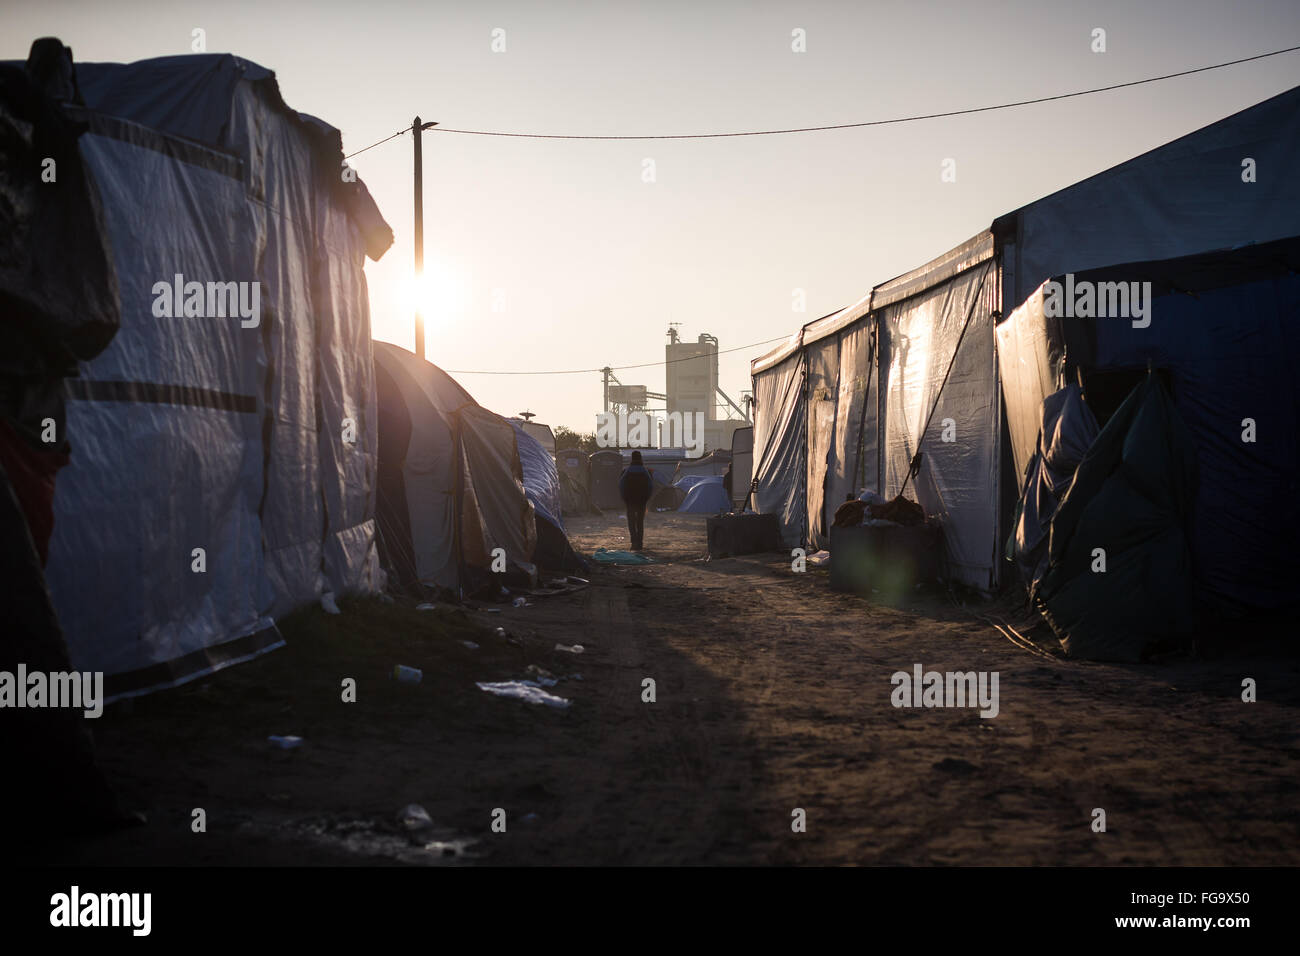 in the Jungle Refuee Camp, Calais, France. Stock Photo